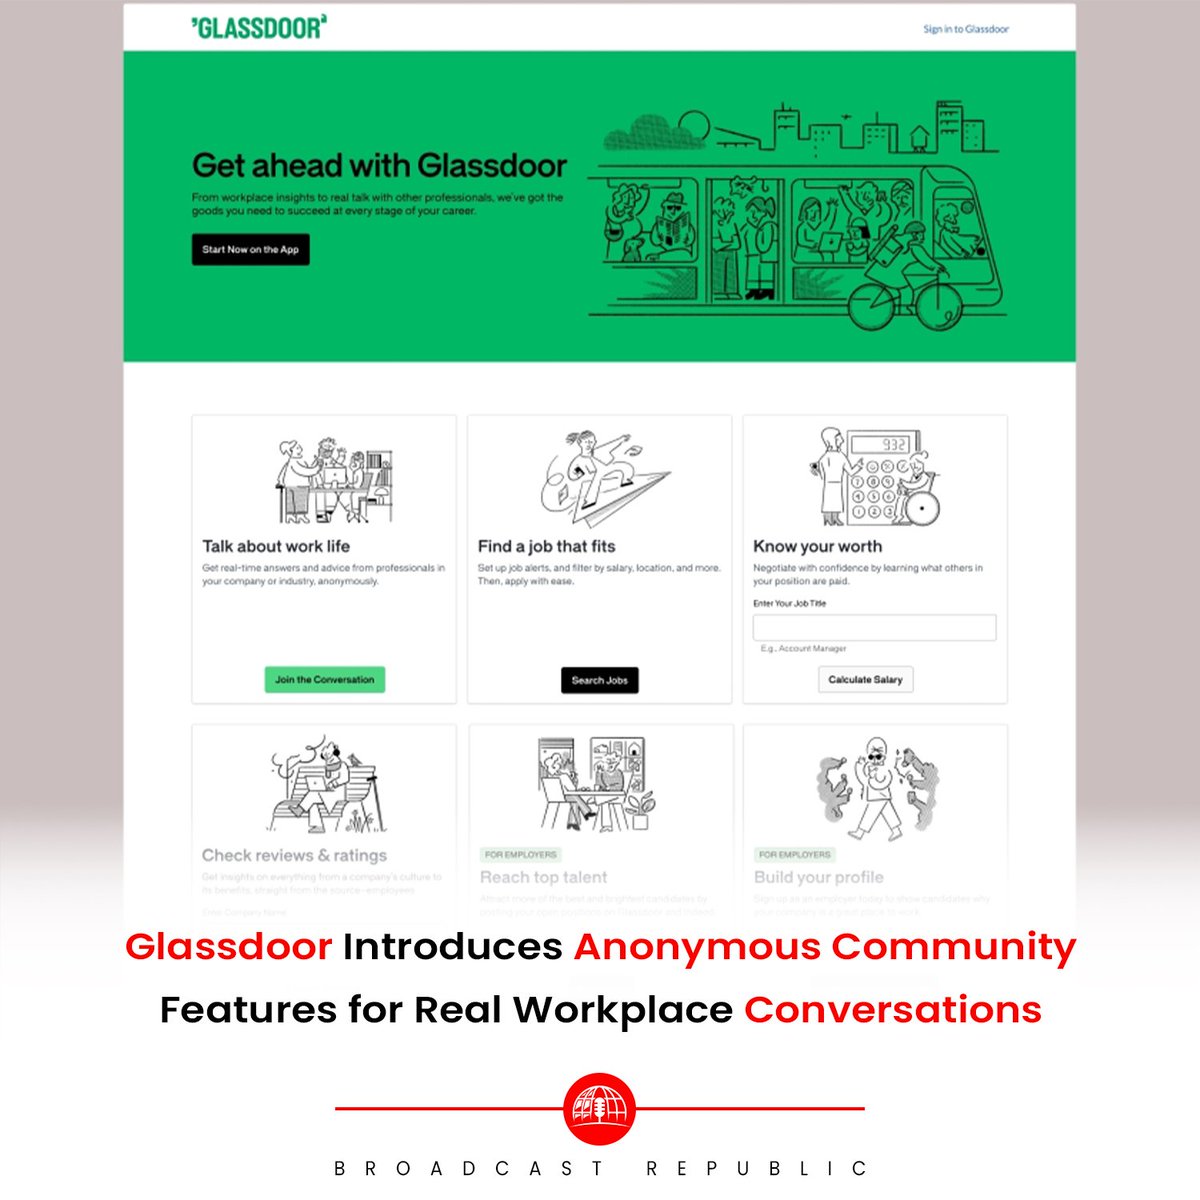 Glassdoor Unveils Anonymous Community Features for Real Workplace Conversations! Join interest-based communities and company bowls to discuss work-life anonymously. A game-changer in employee sentiment! 

#BroadcastRepublic #Glassdoor #AnonymousCommunity #WorkplaceConversations